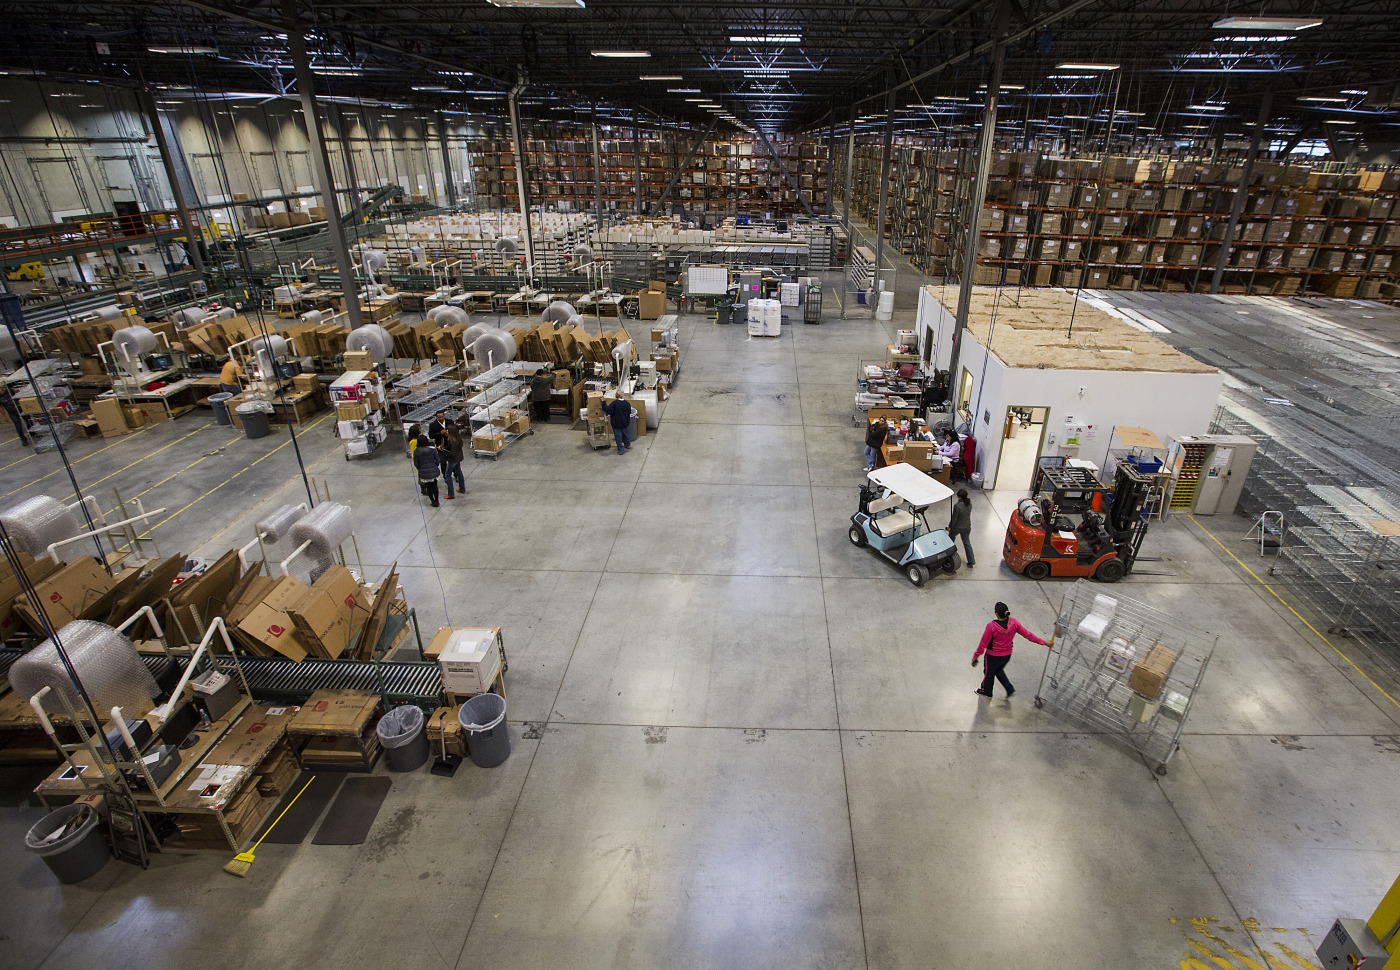 Operations Inside The Overstock.com Distribution Center On Cyber Monday